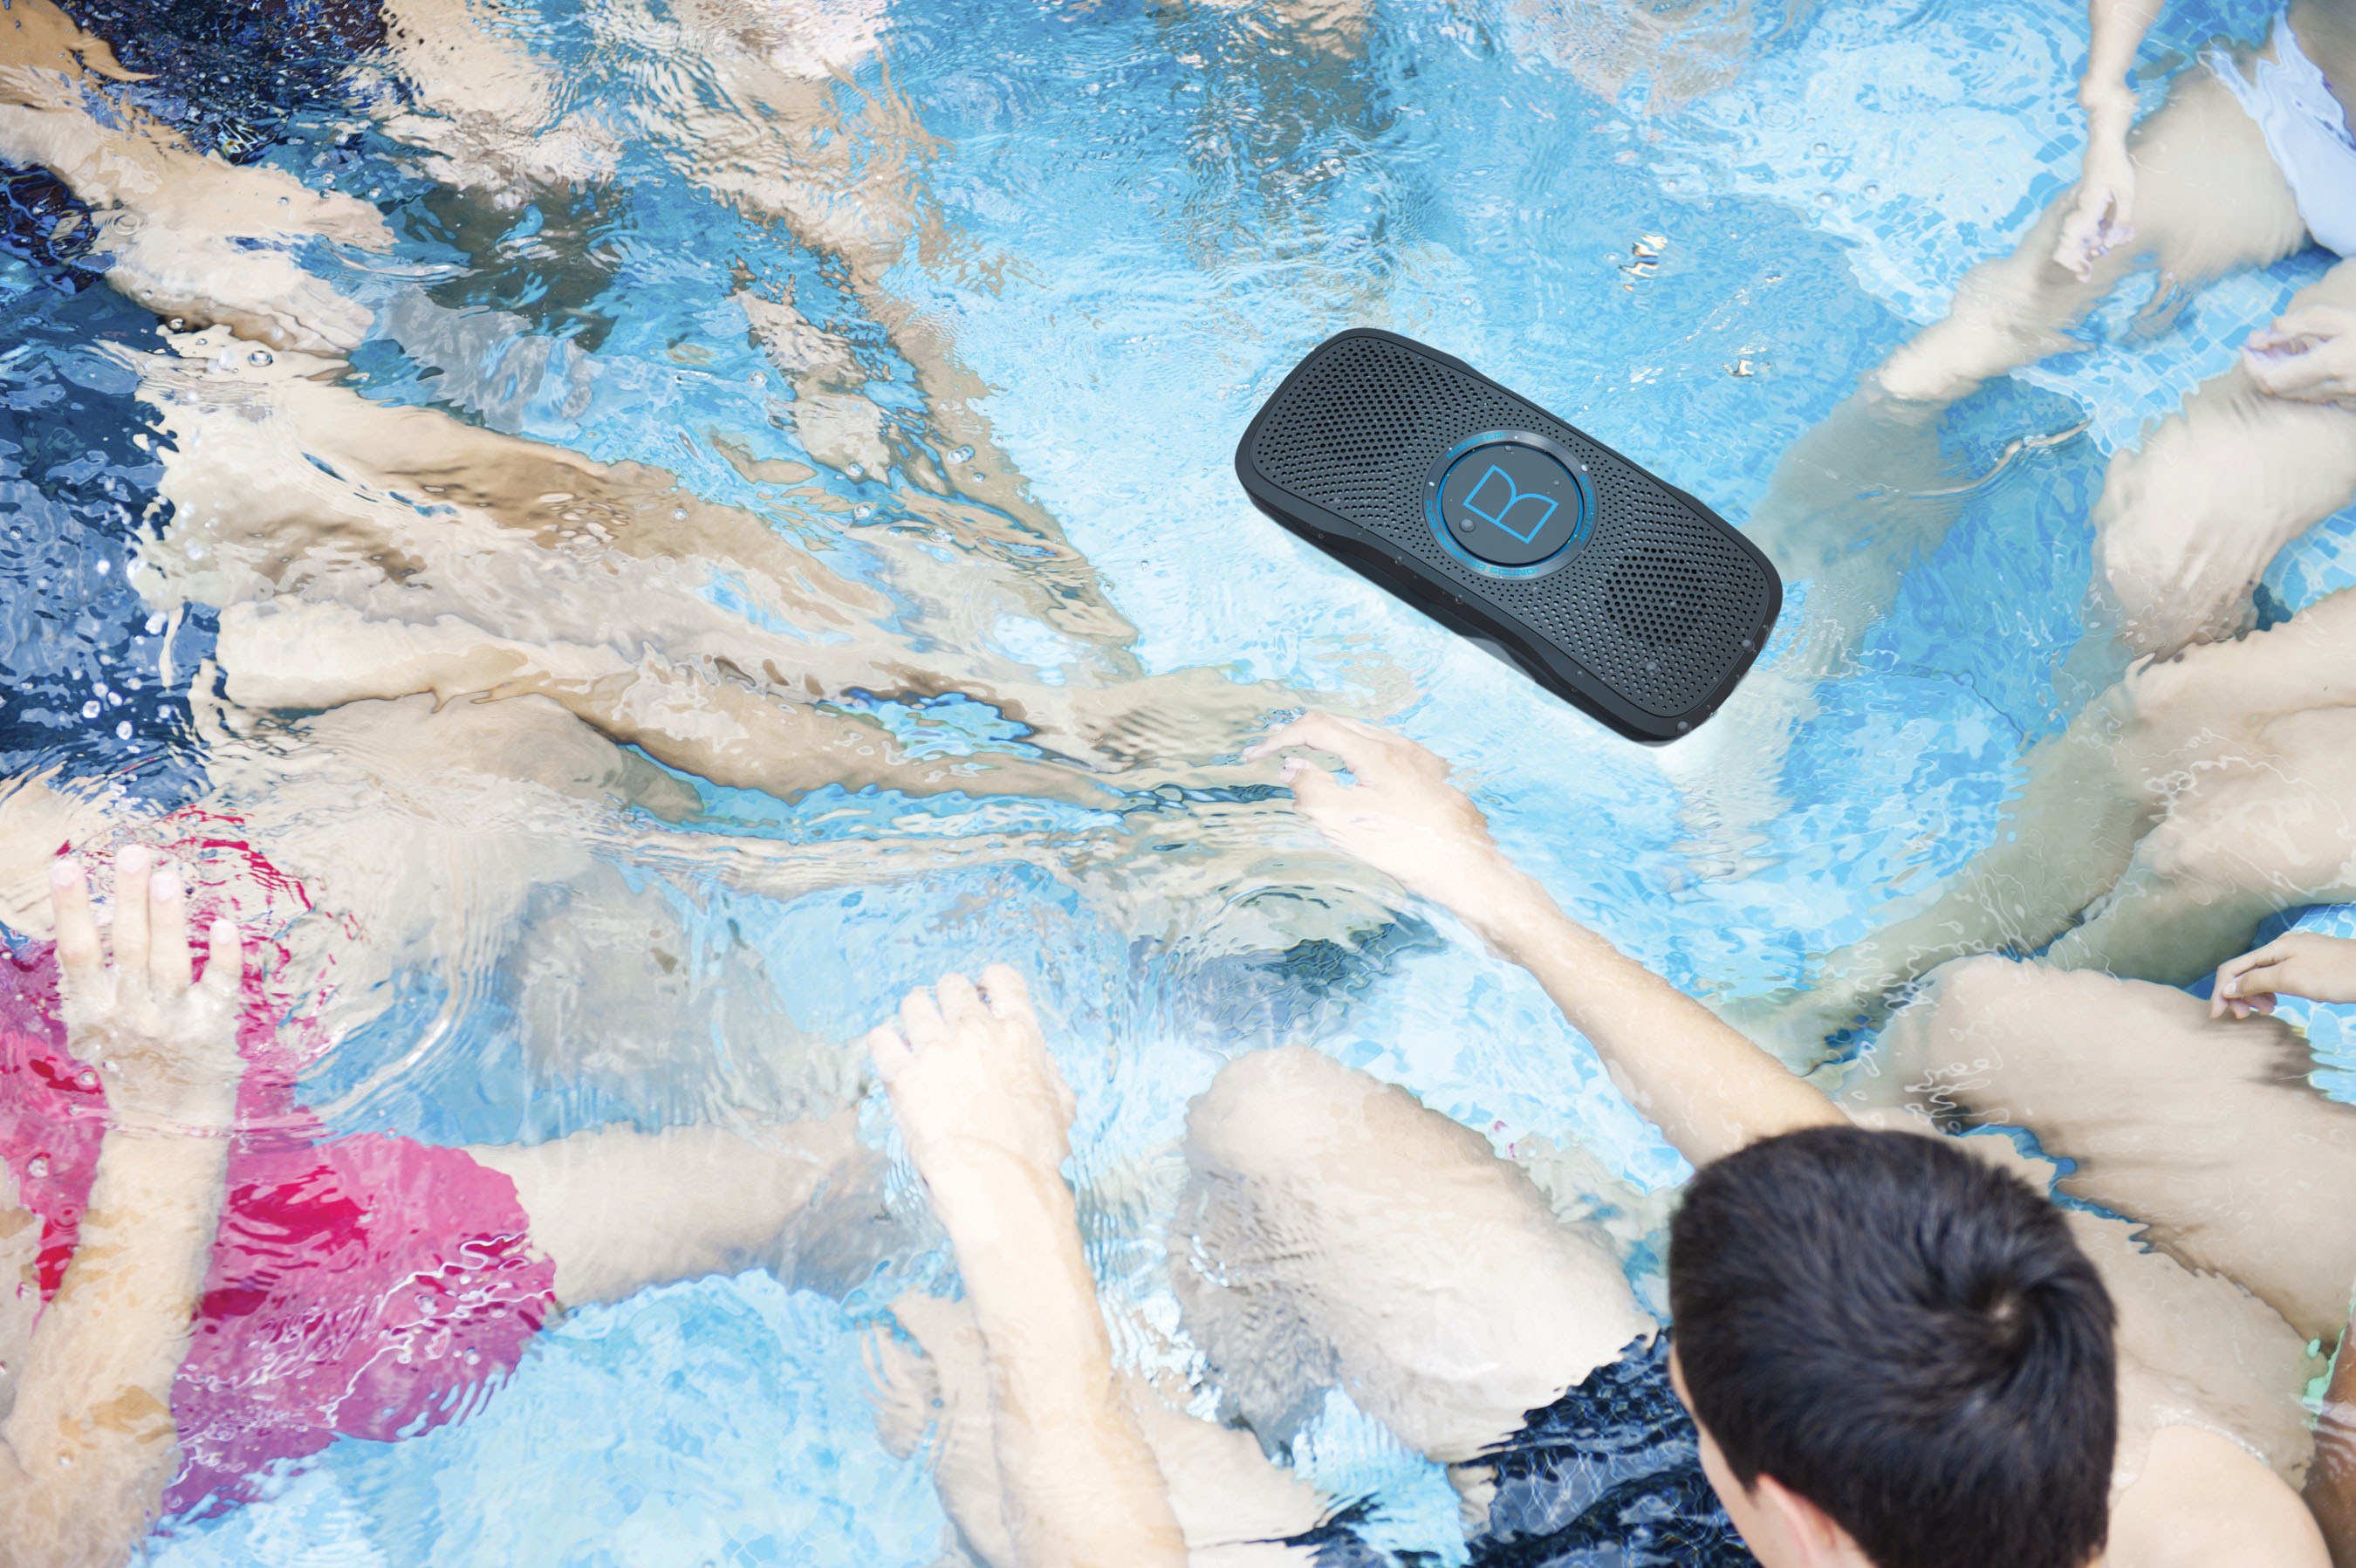 Monster is proud to announce the maiden voyage of its breakthrough SuperStar(TM) BackFloat(TM) (MSRP: $169) high-performance floatable portable speaker at CES 2015. No matter where you want to enjoy your music - beach, pool, shower, surfing, outdoors or around the house - SuperStar BackFloat delivers great sounding music, with acclaimed Pure Monster Sound(TM). SuperStar(TM) BackFloat(TM) features built-in mics that also offer speakerphone functionality for taking conference calls via a smartphone.